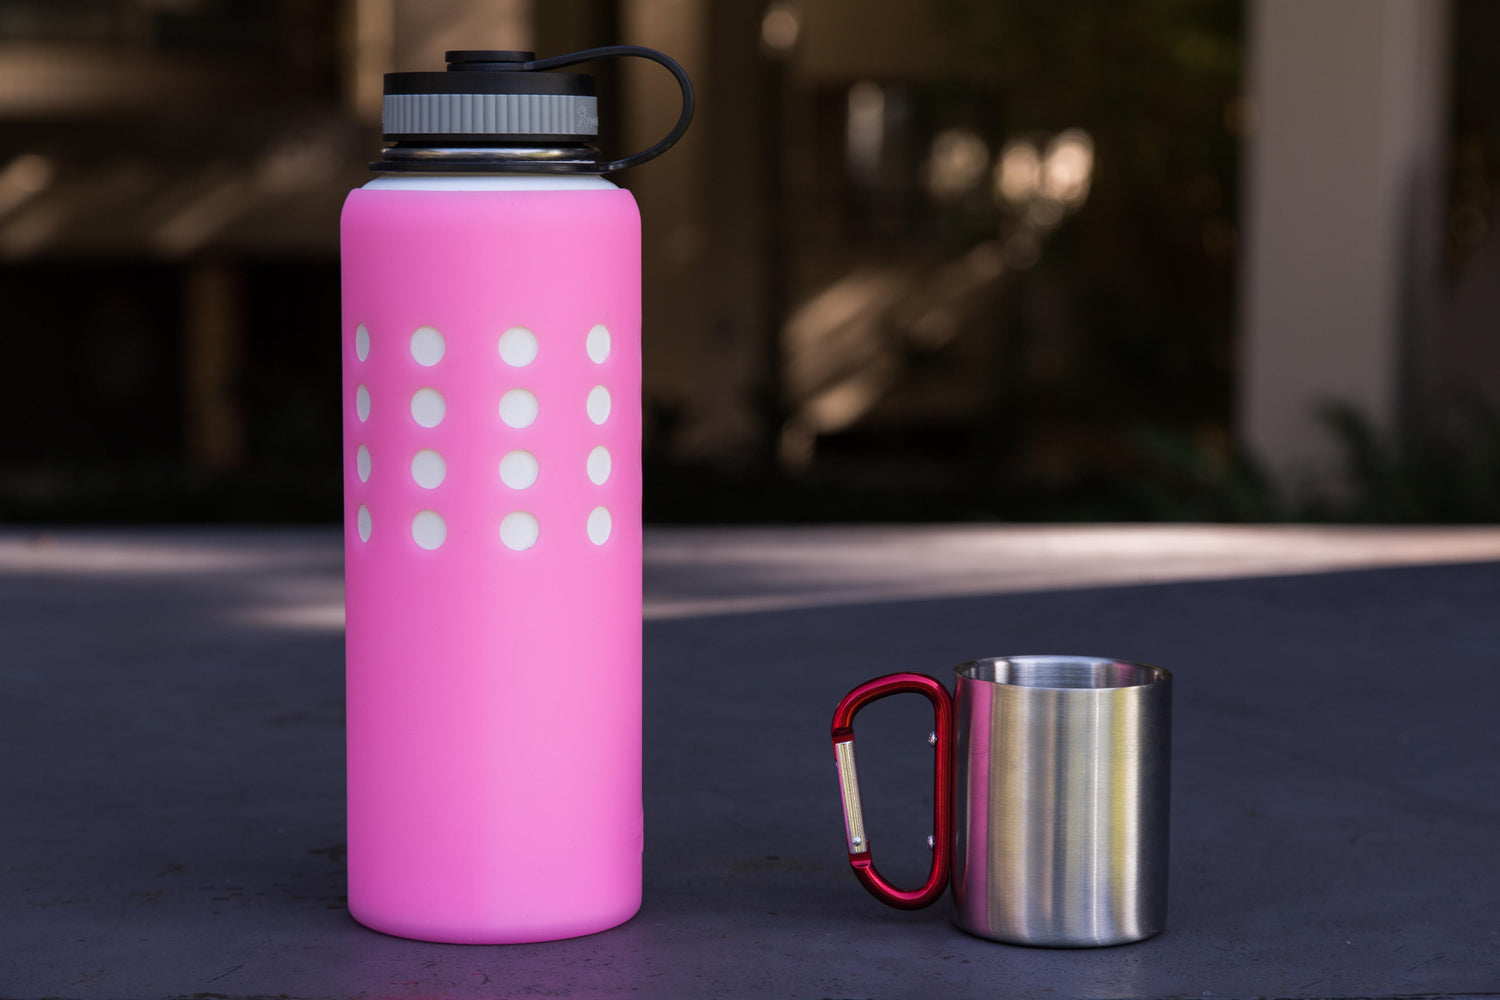 32oz Hydroskins for Hydroflask (Various Colors Available) – hydroskins